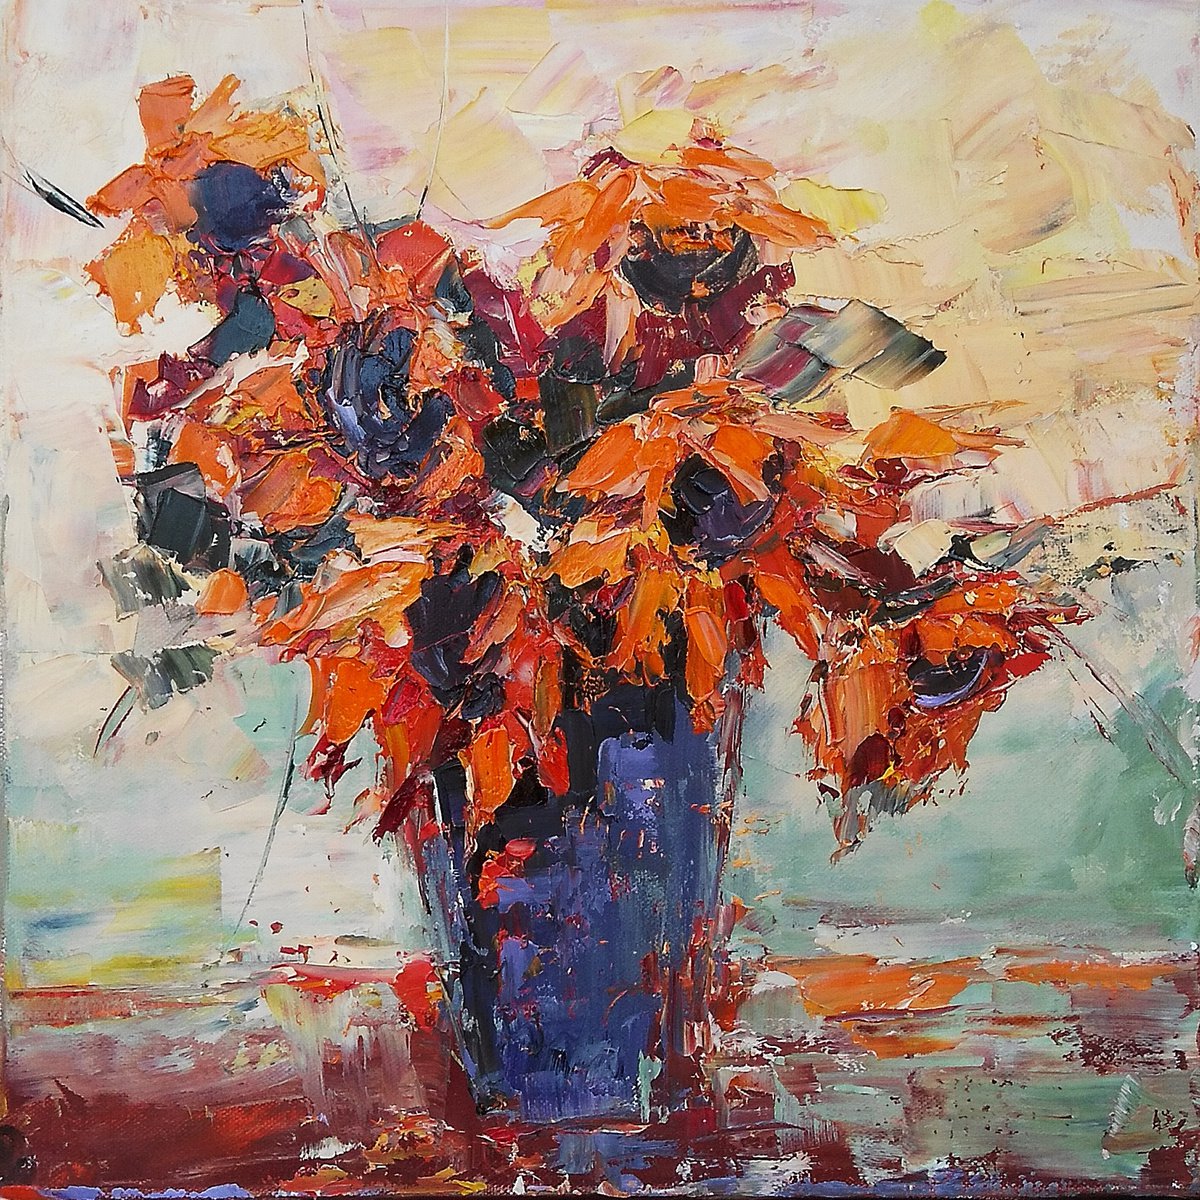 HOME AGAIN, 40x40cm, sunflowers oil floral still life painting by Emilia Milcheva